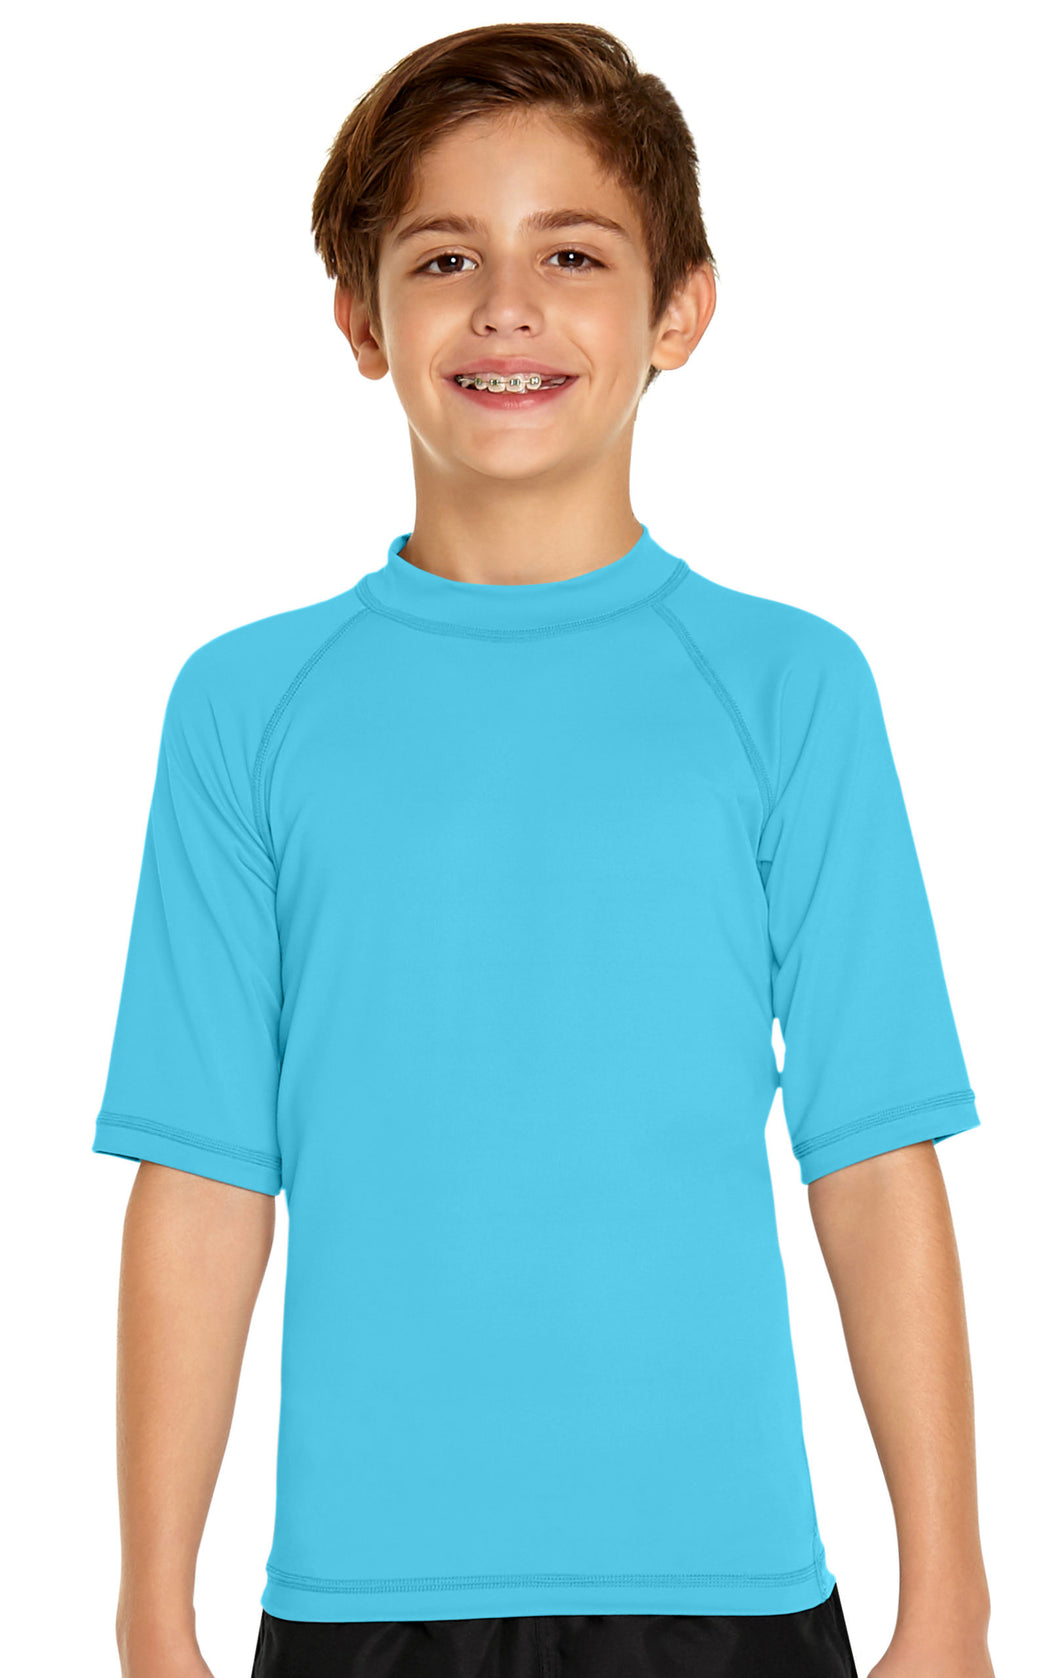 Wet Effect Youth Rash Guards S/S